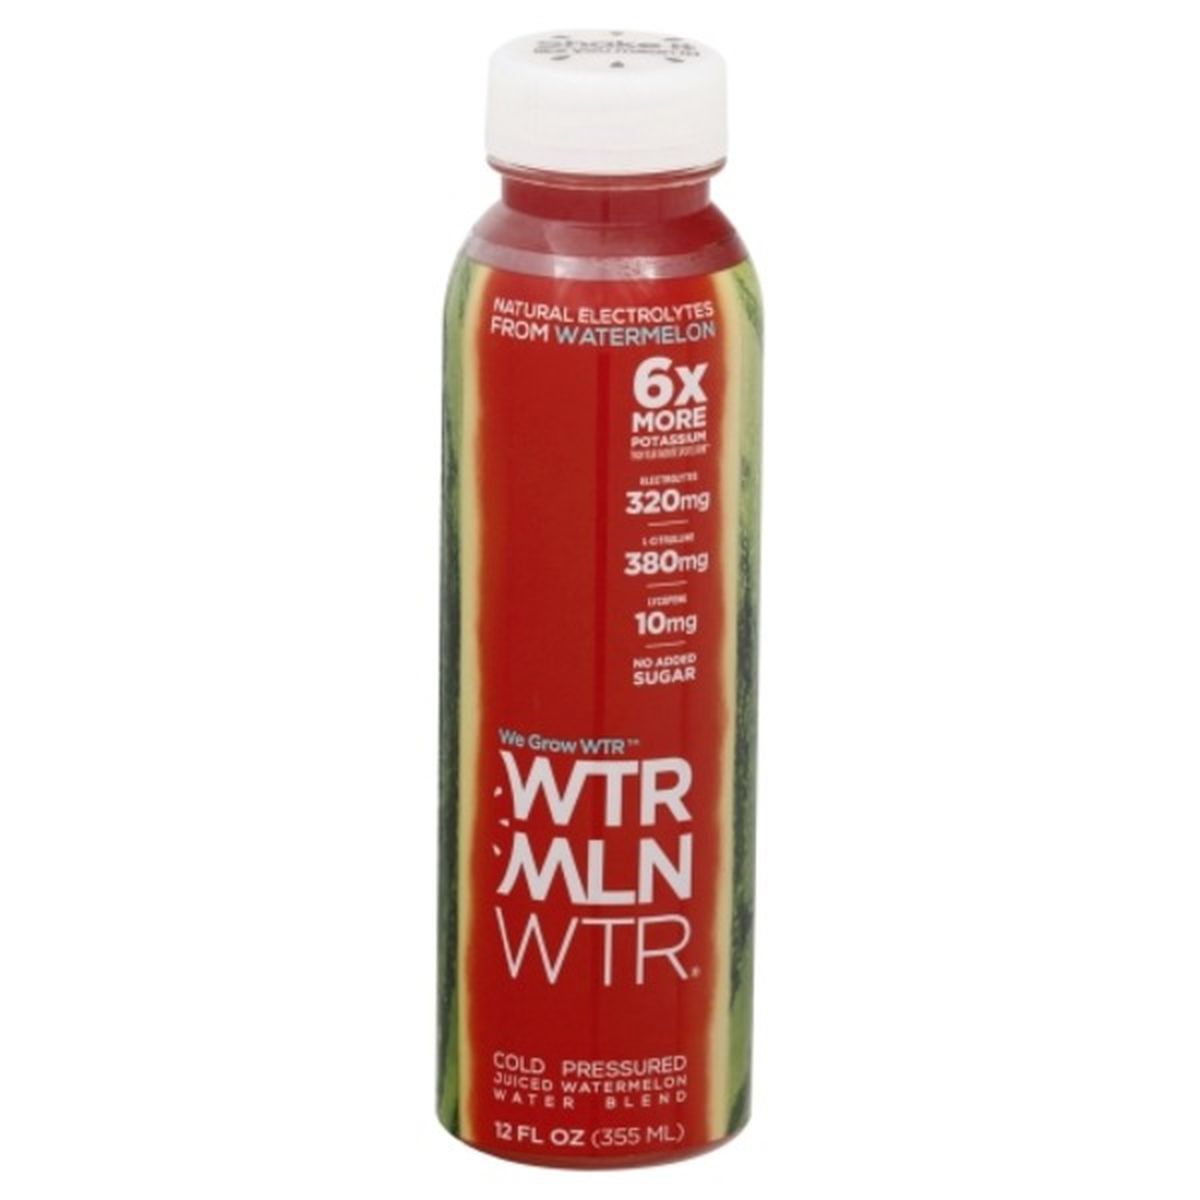 Calories in WTRMLN WTR We Grow WTR Juice, Cold Pressured, Watermelon